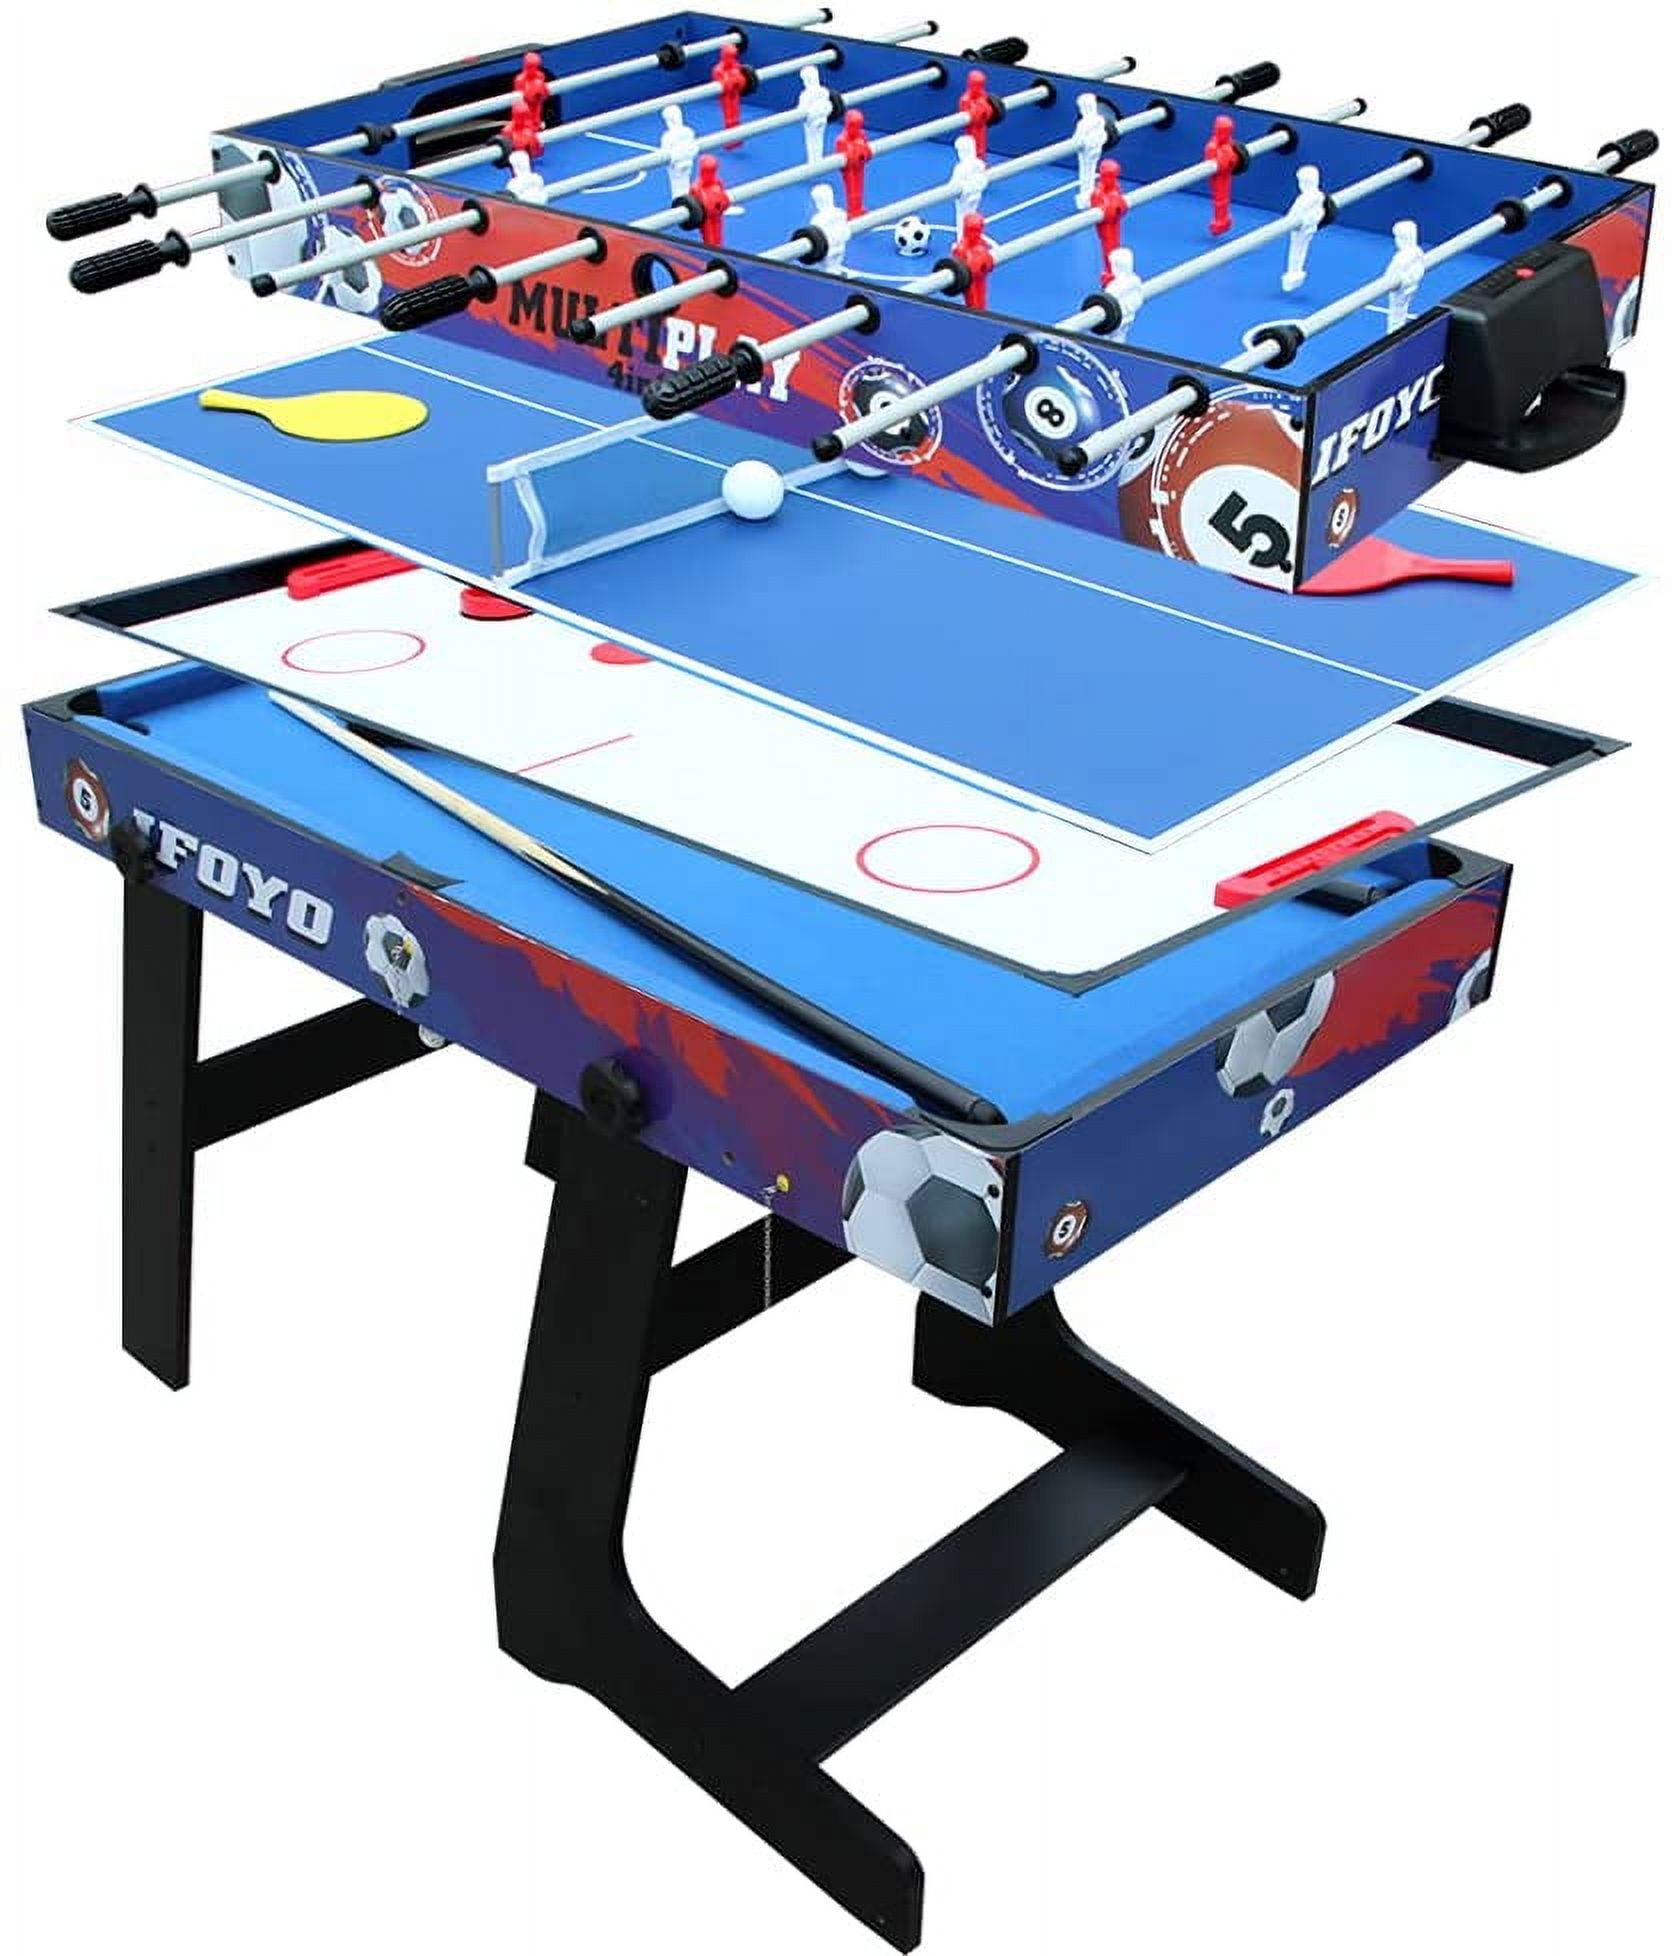 36” 4-in-1 Multi Game Table, Combo Game Table Set for Kids, Childrens, Blue